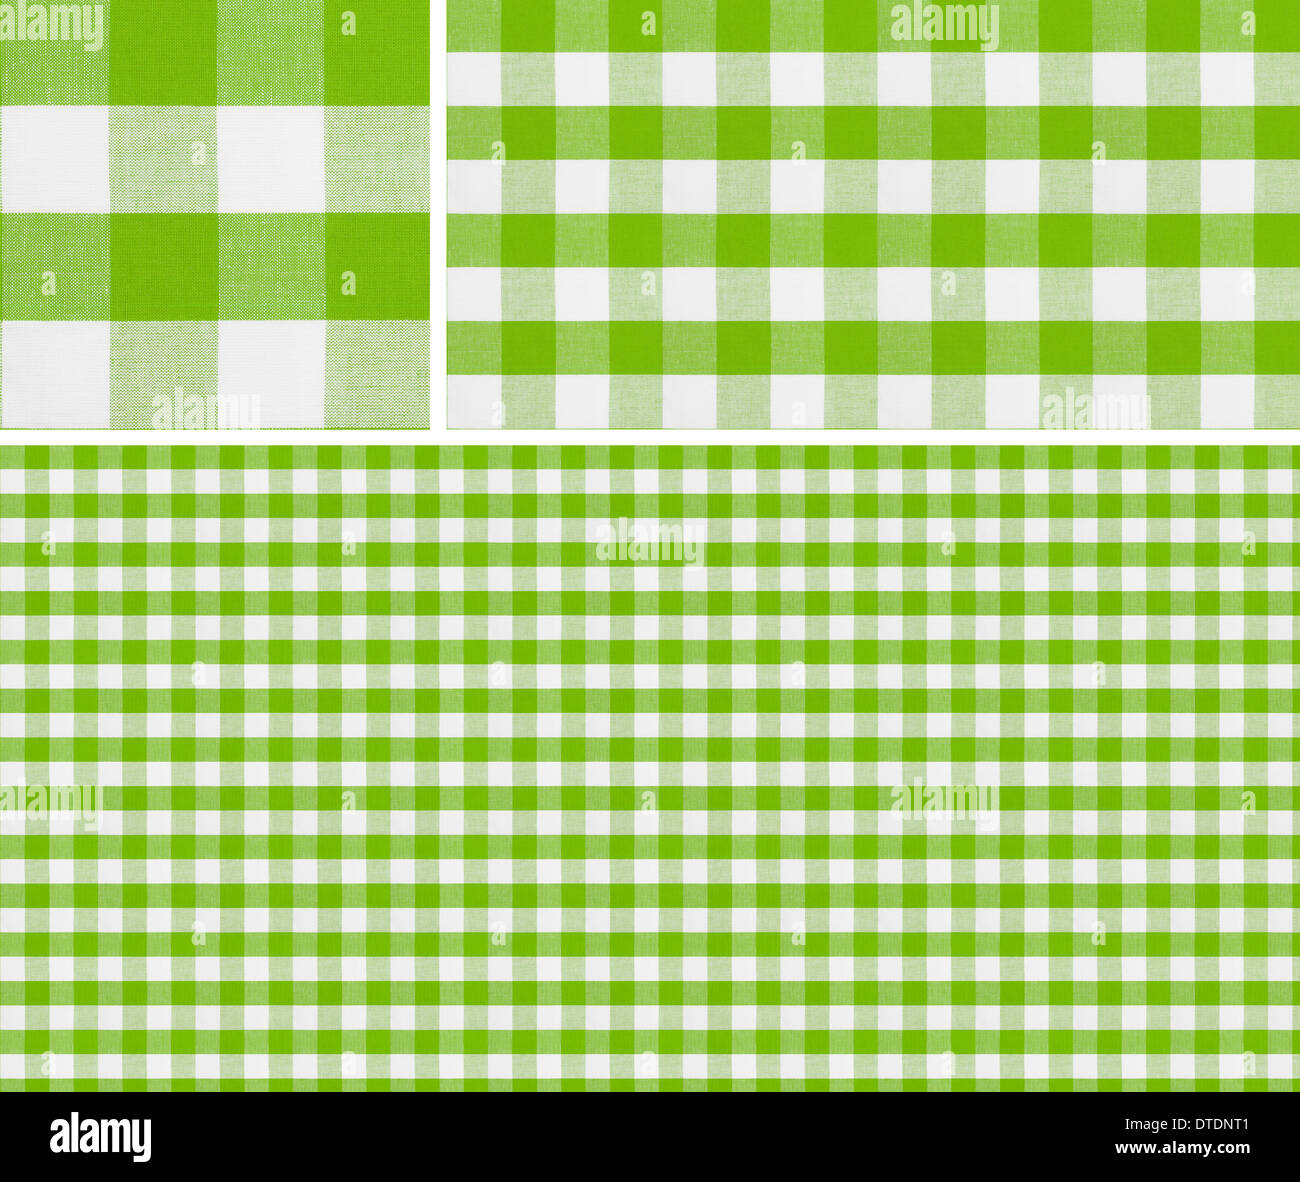 Seamless picnic pattern 1500x1500 with samples. Good for green checkered tablecloth creation of any size. Stock Photo